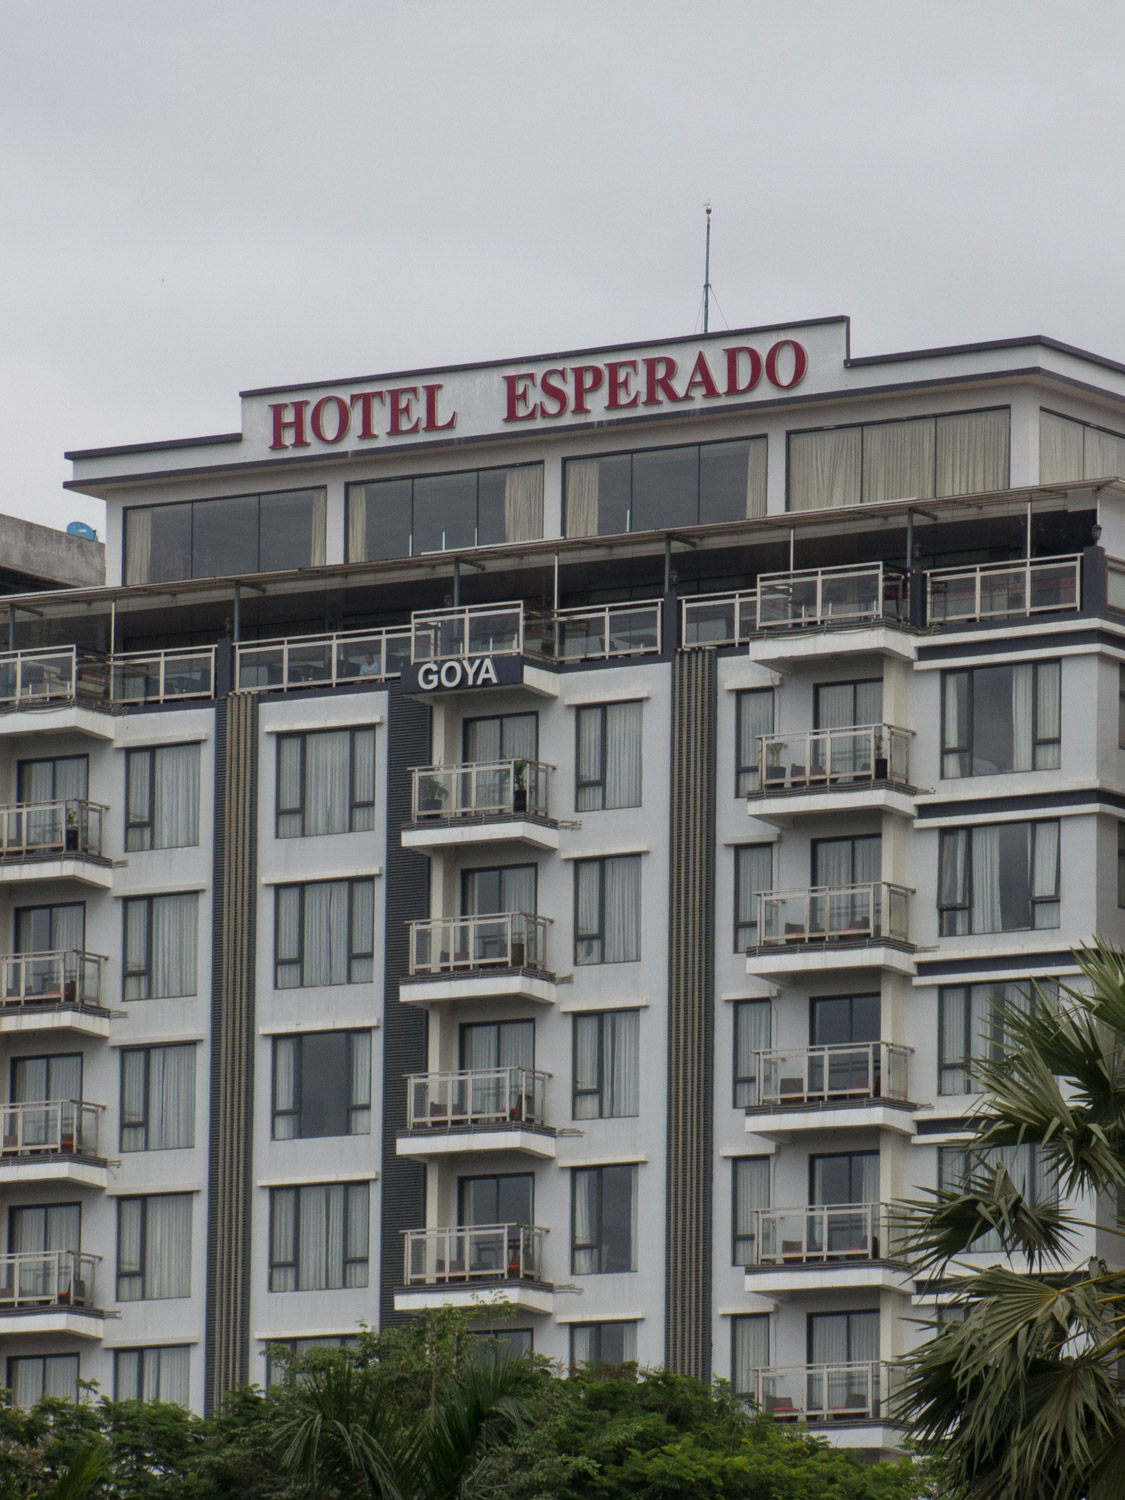 Hotel Esperado experienced a marked uptick in bookings once the D fell off their sign. Also, bonus joke about the Goya room being full of dead Spaniards.